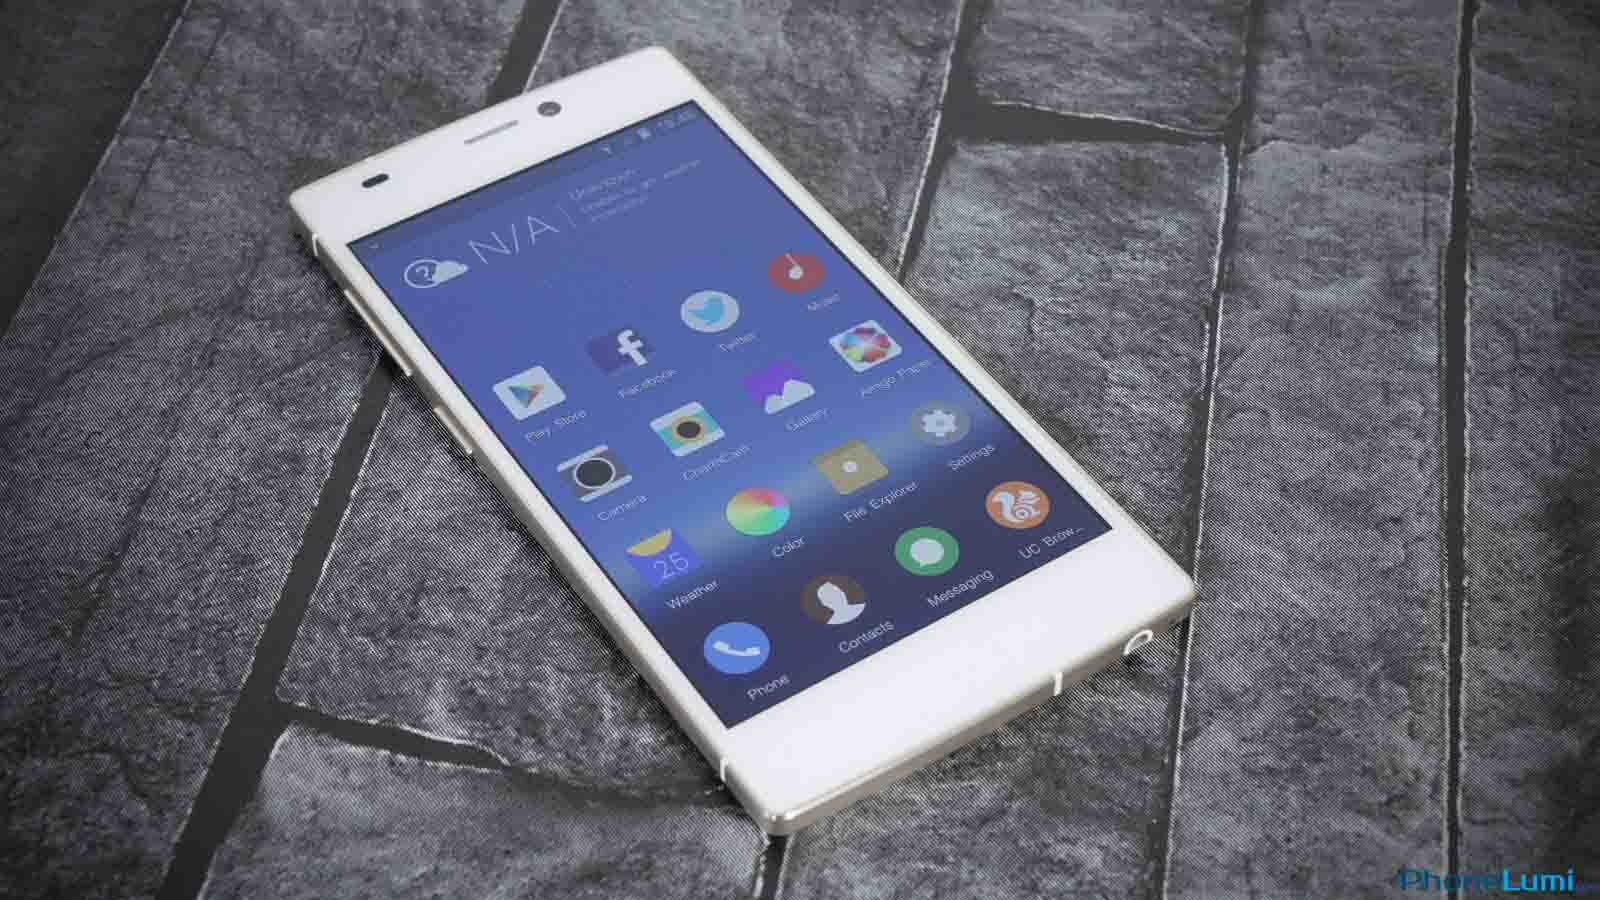 Rom gốc Gionee Elife S5.5 Android 5.0